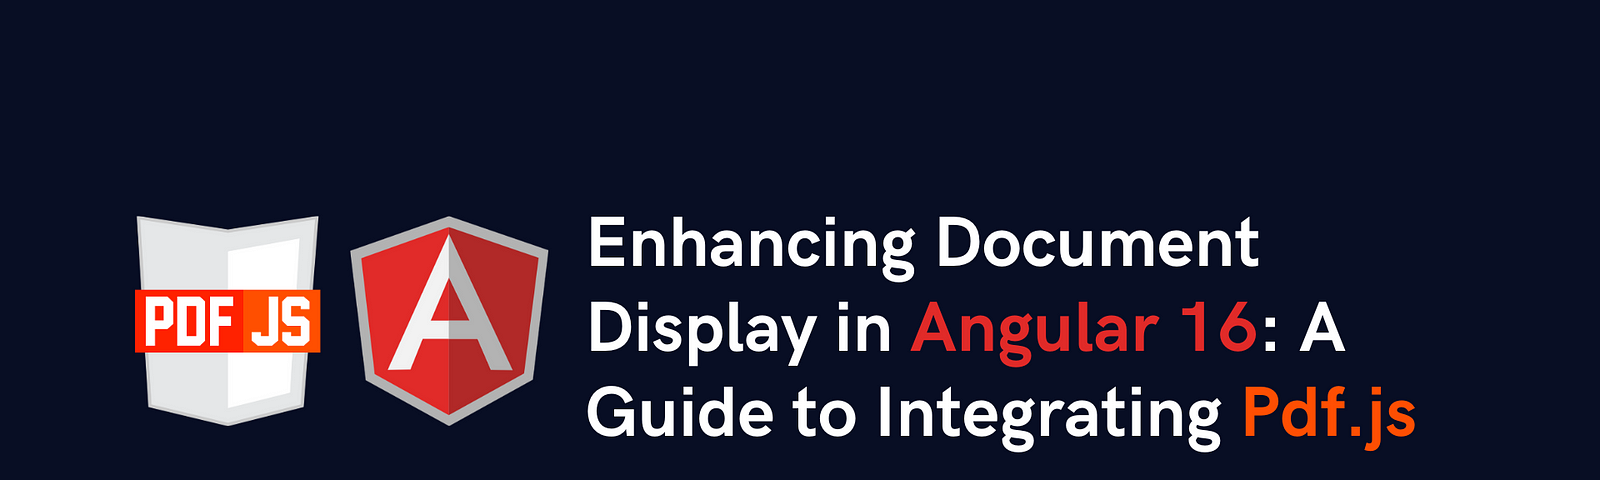 Enhancing Document Display in Angular 16: A Guide to Integrating Pdf.js